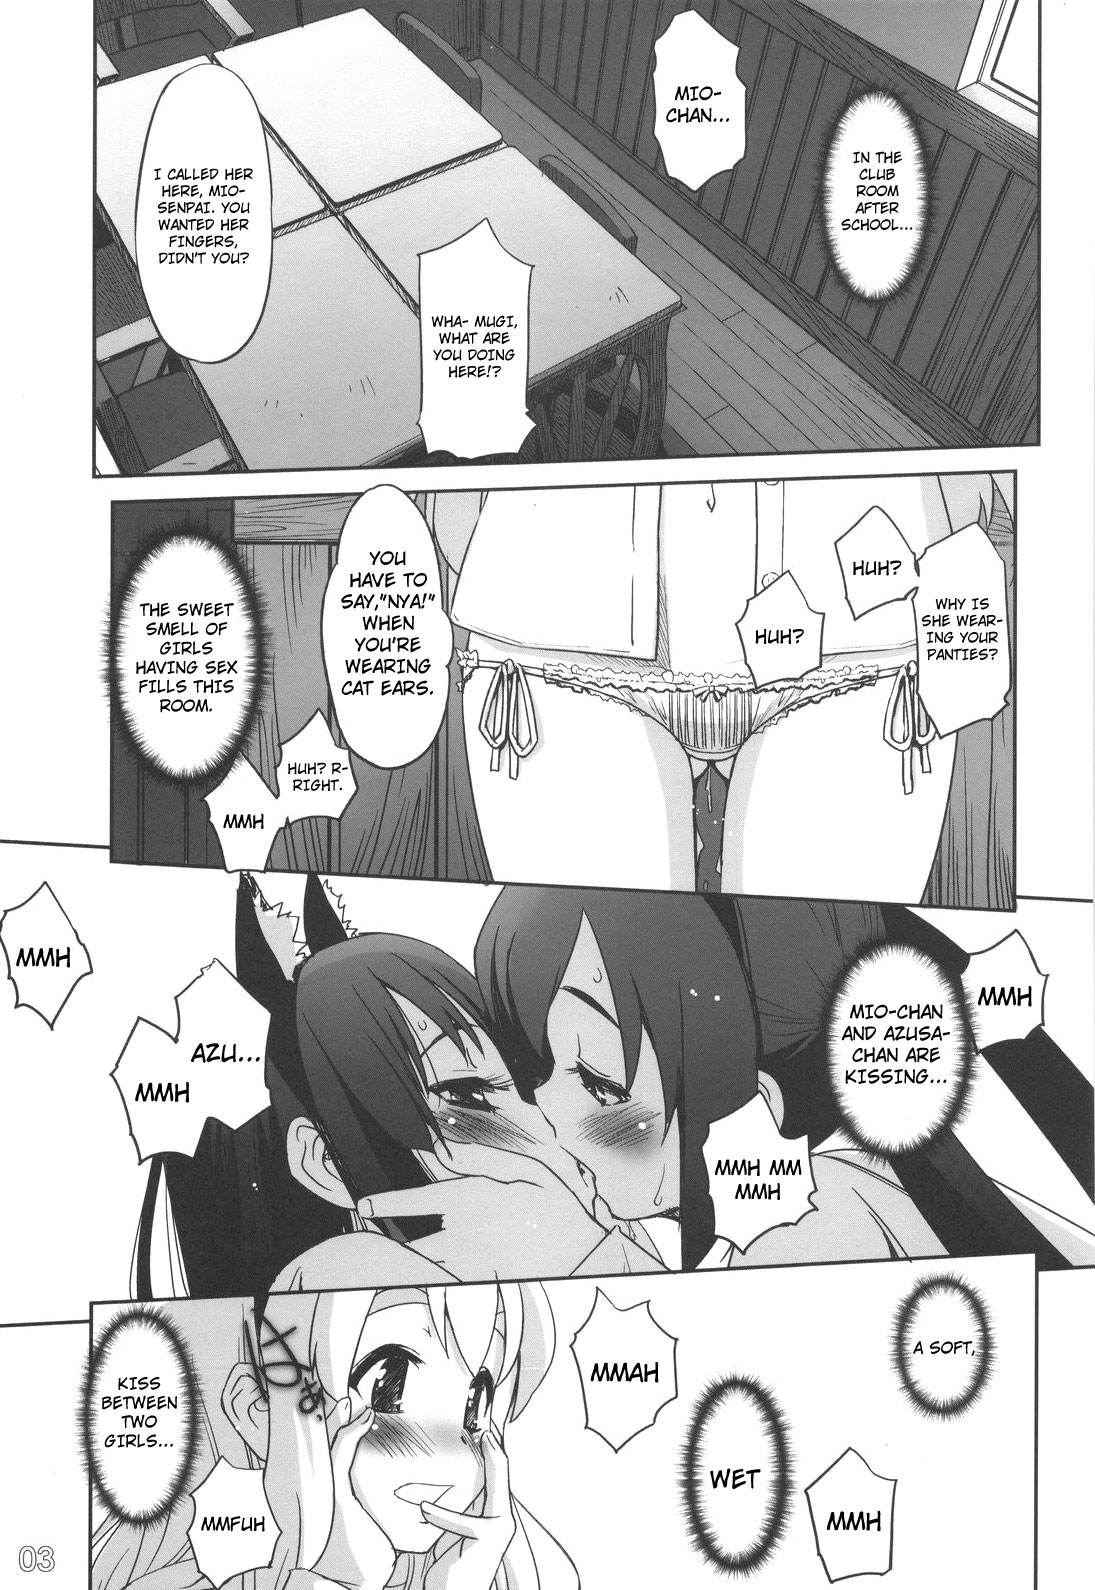 (C76) [G-Power! (Sasayuki)] Cat Ears And A Restroom And The Club Room After School (K-ON) [ENG] (C76) [G-Power! (SASAYUKi)] ネコミミとトイレと放課後の部室 (けいおん!) [英訳]